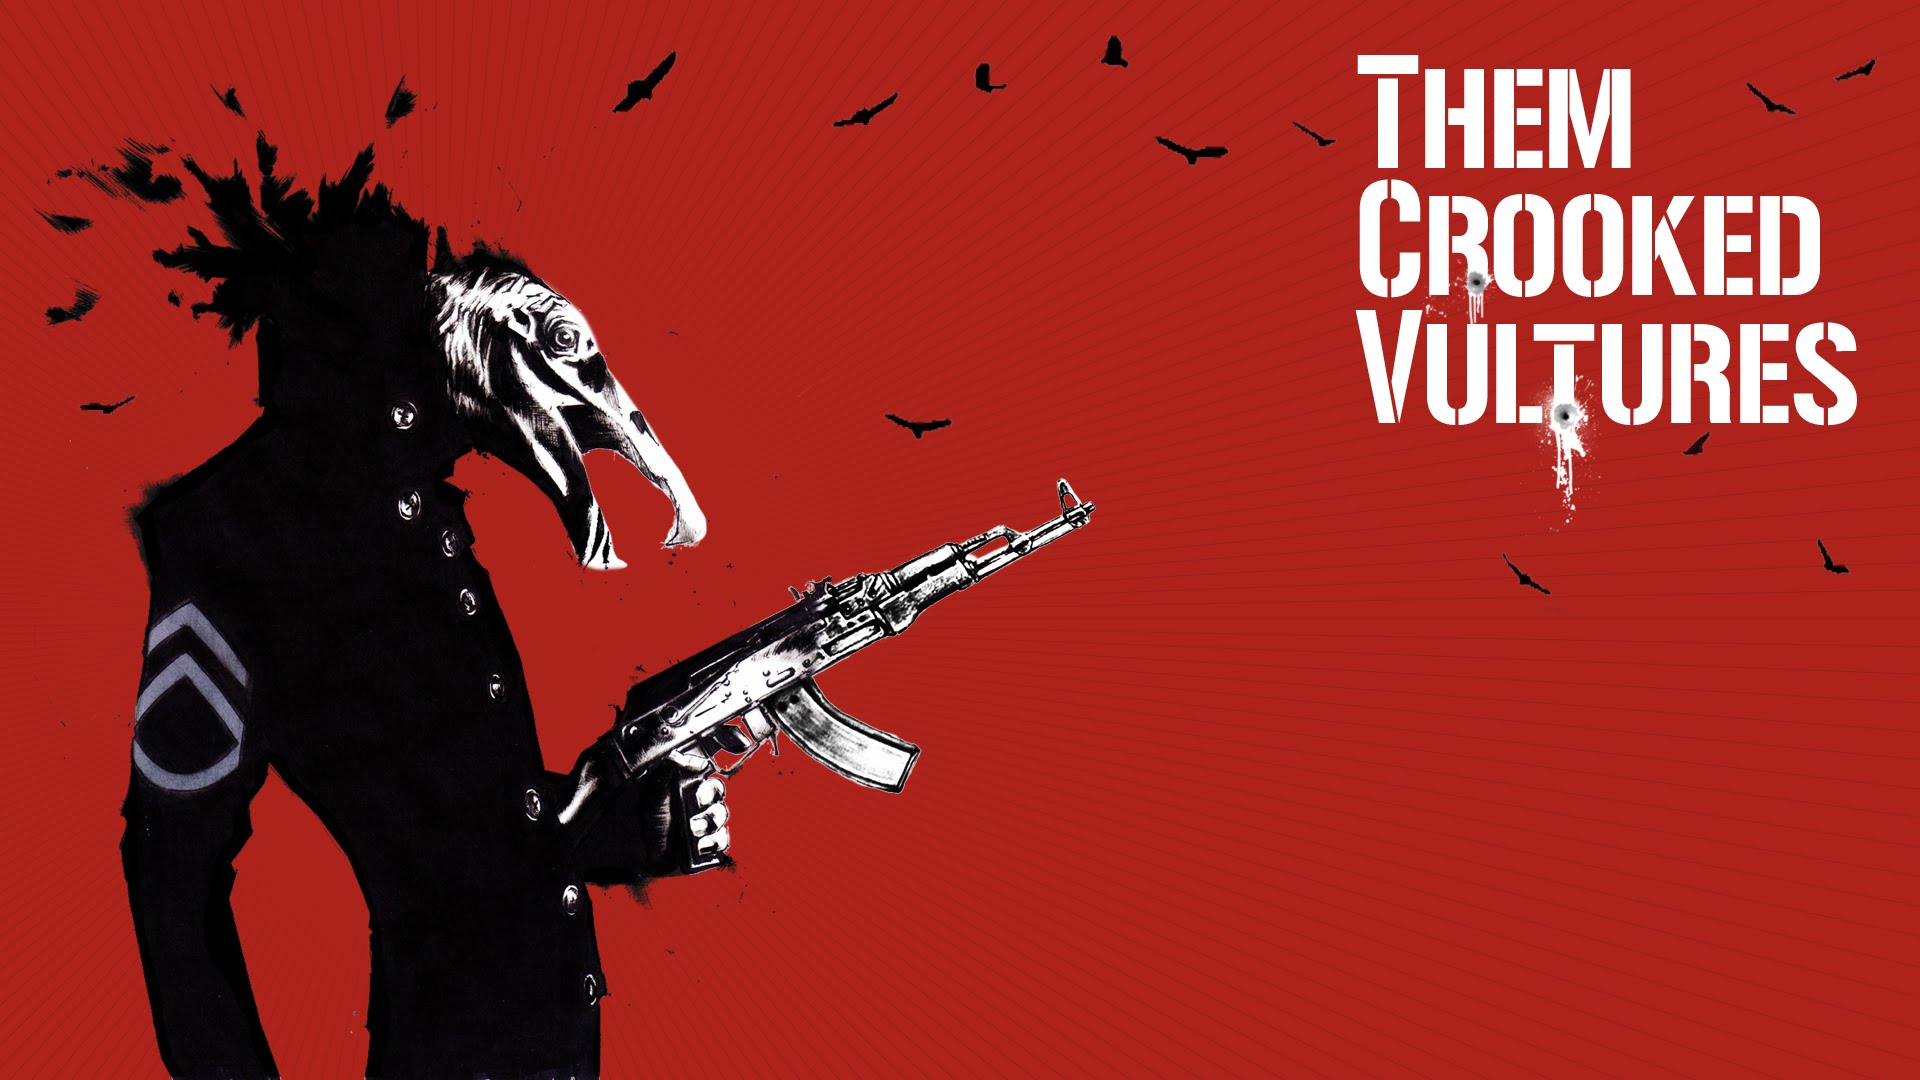 HQ Them Crooked Vultures Wallpapers | File 176.67Kb